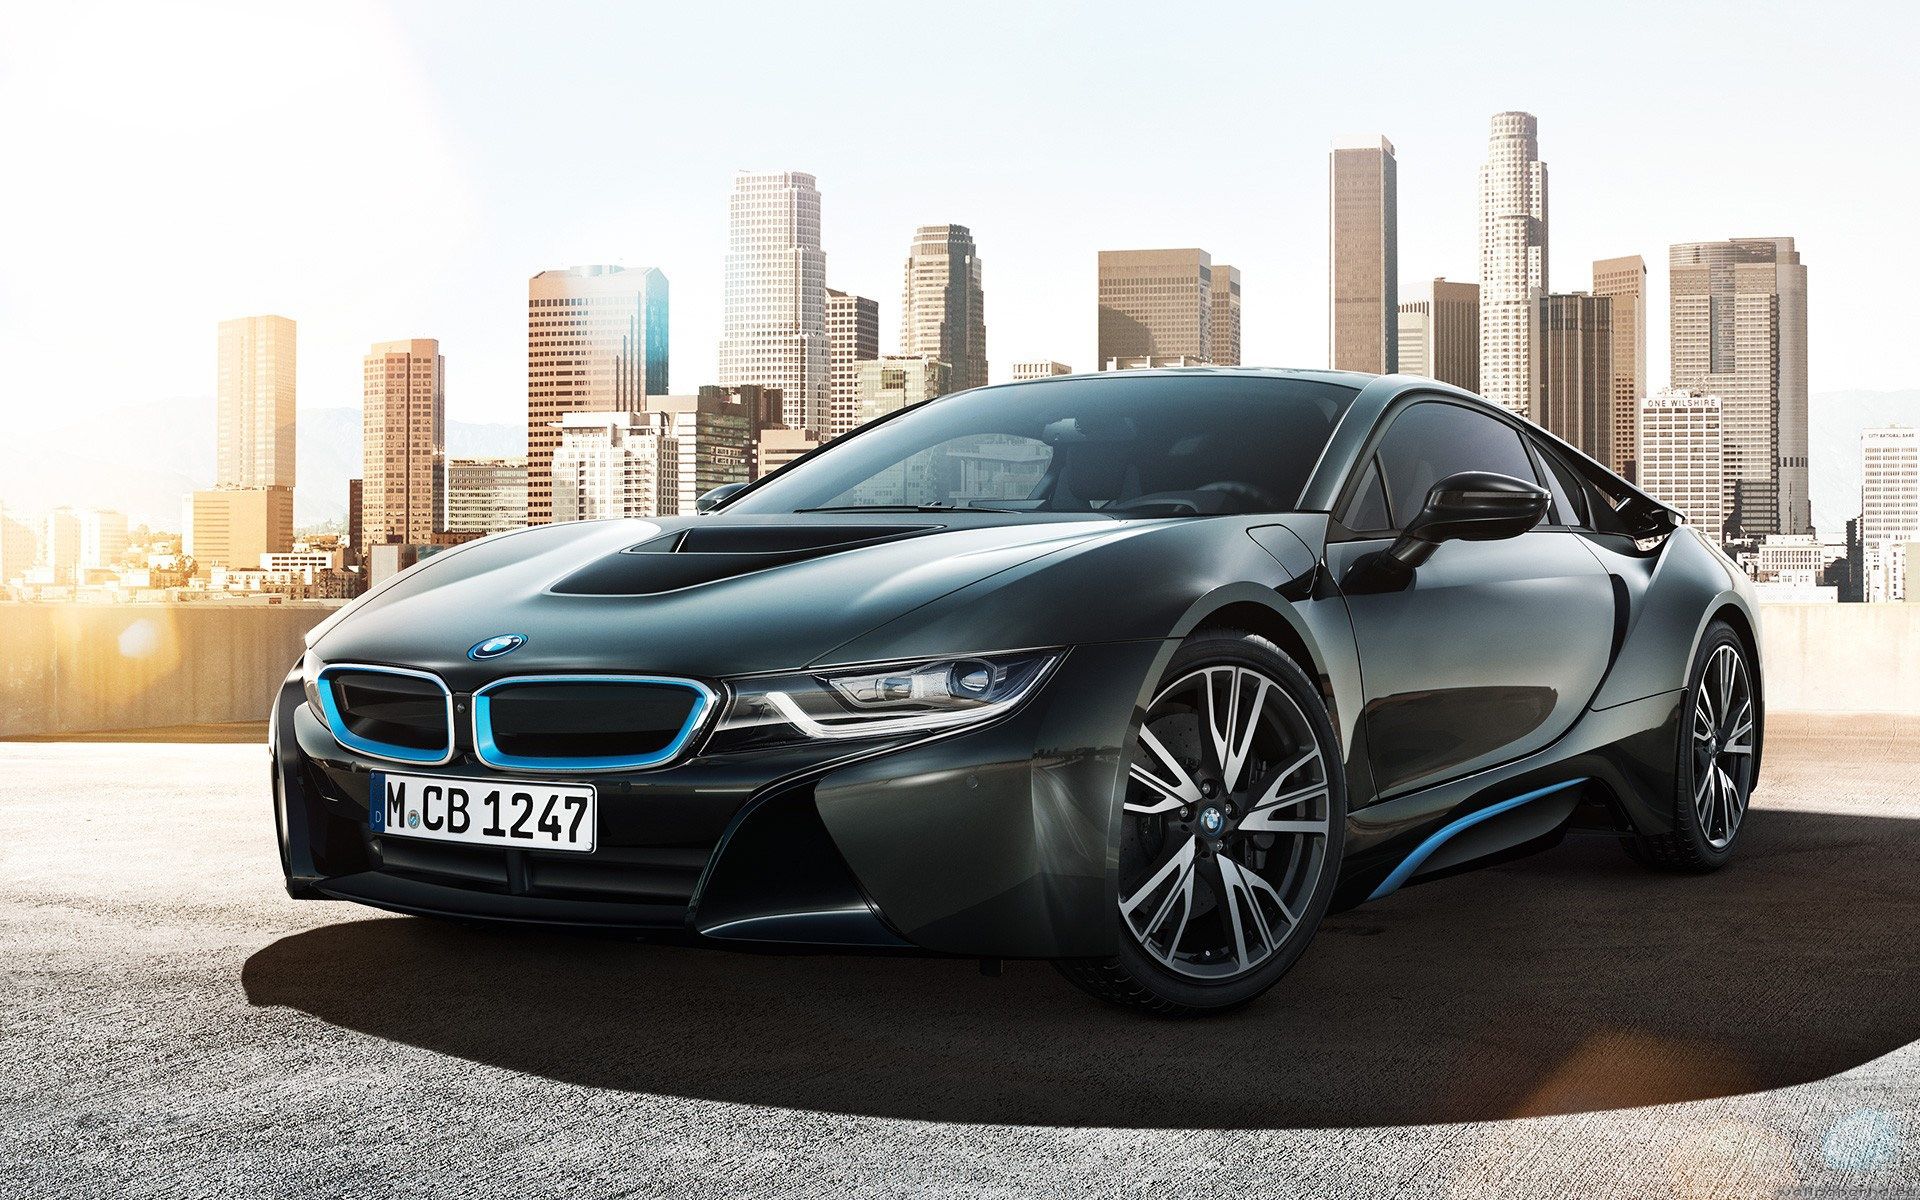  BMW I8 Hintergrundbild 1920x1200. Mobile wallpaper: Bmw I Vehicles, Bmw, 315798 download the picture for free